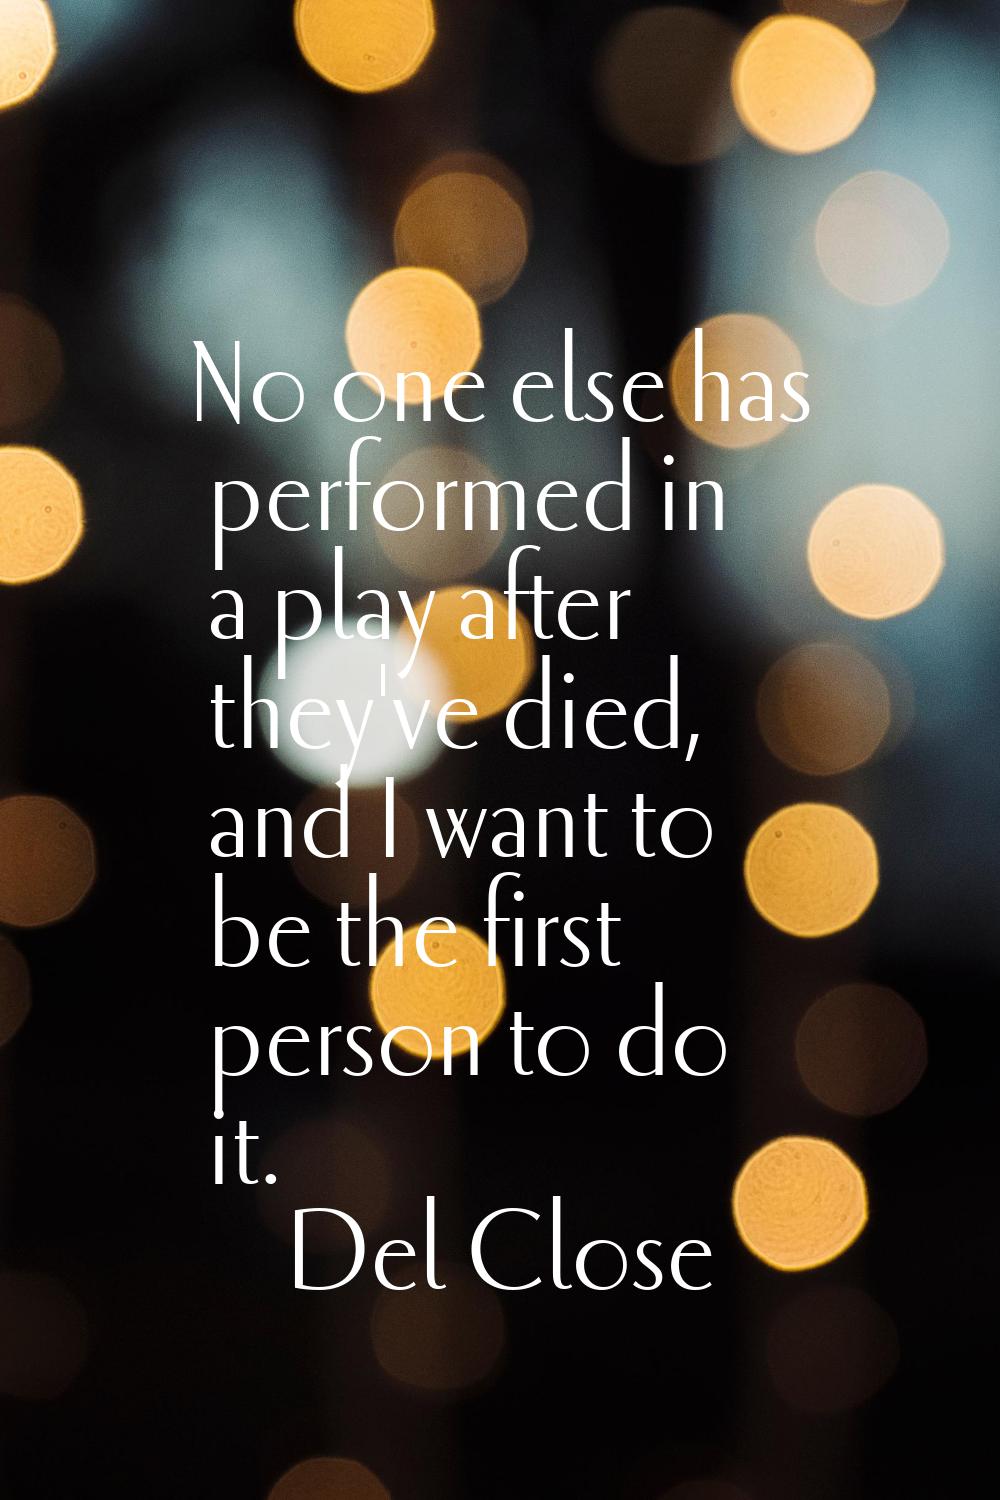 No one else has performed in a play after they've died, and I want to be the first person to do it.